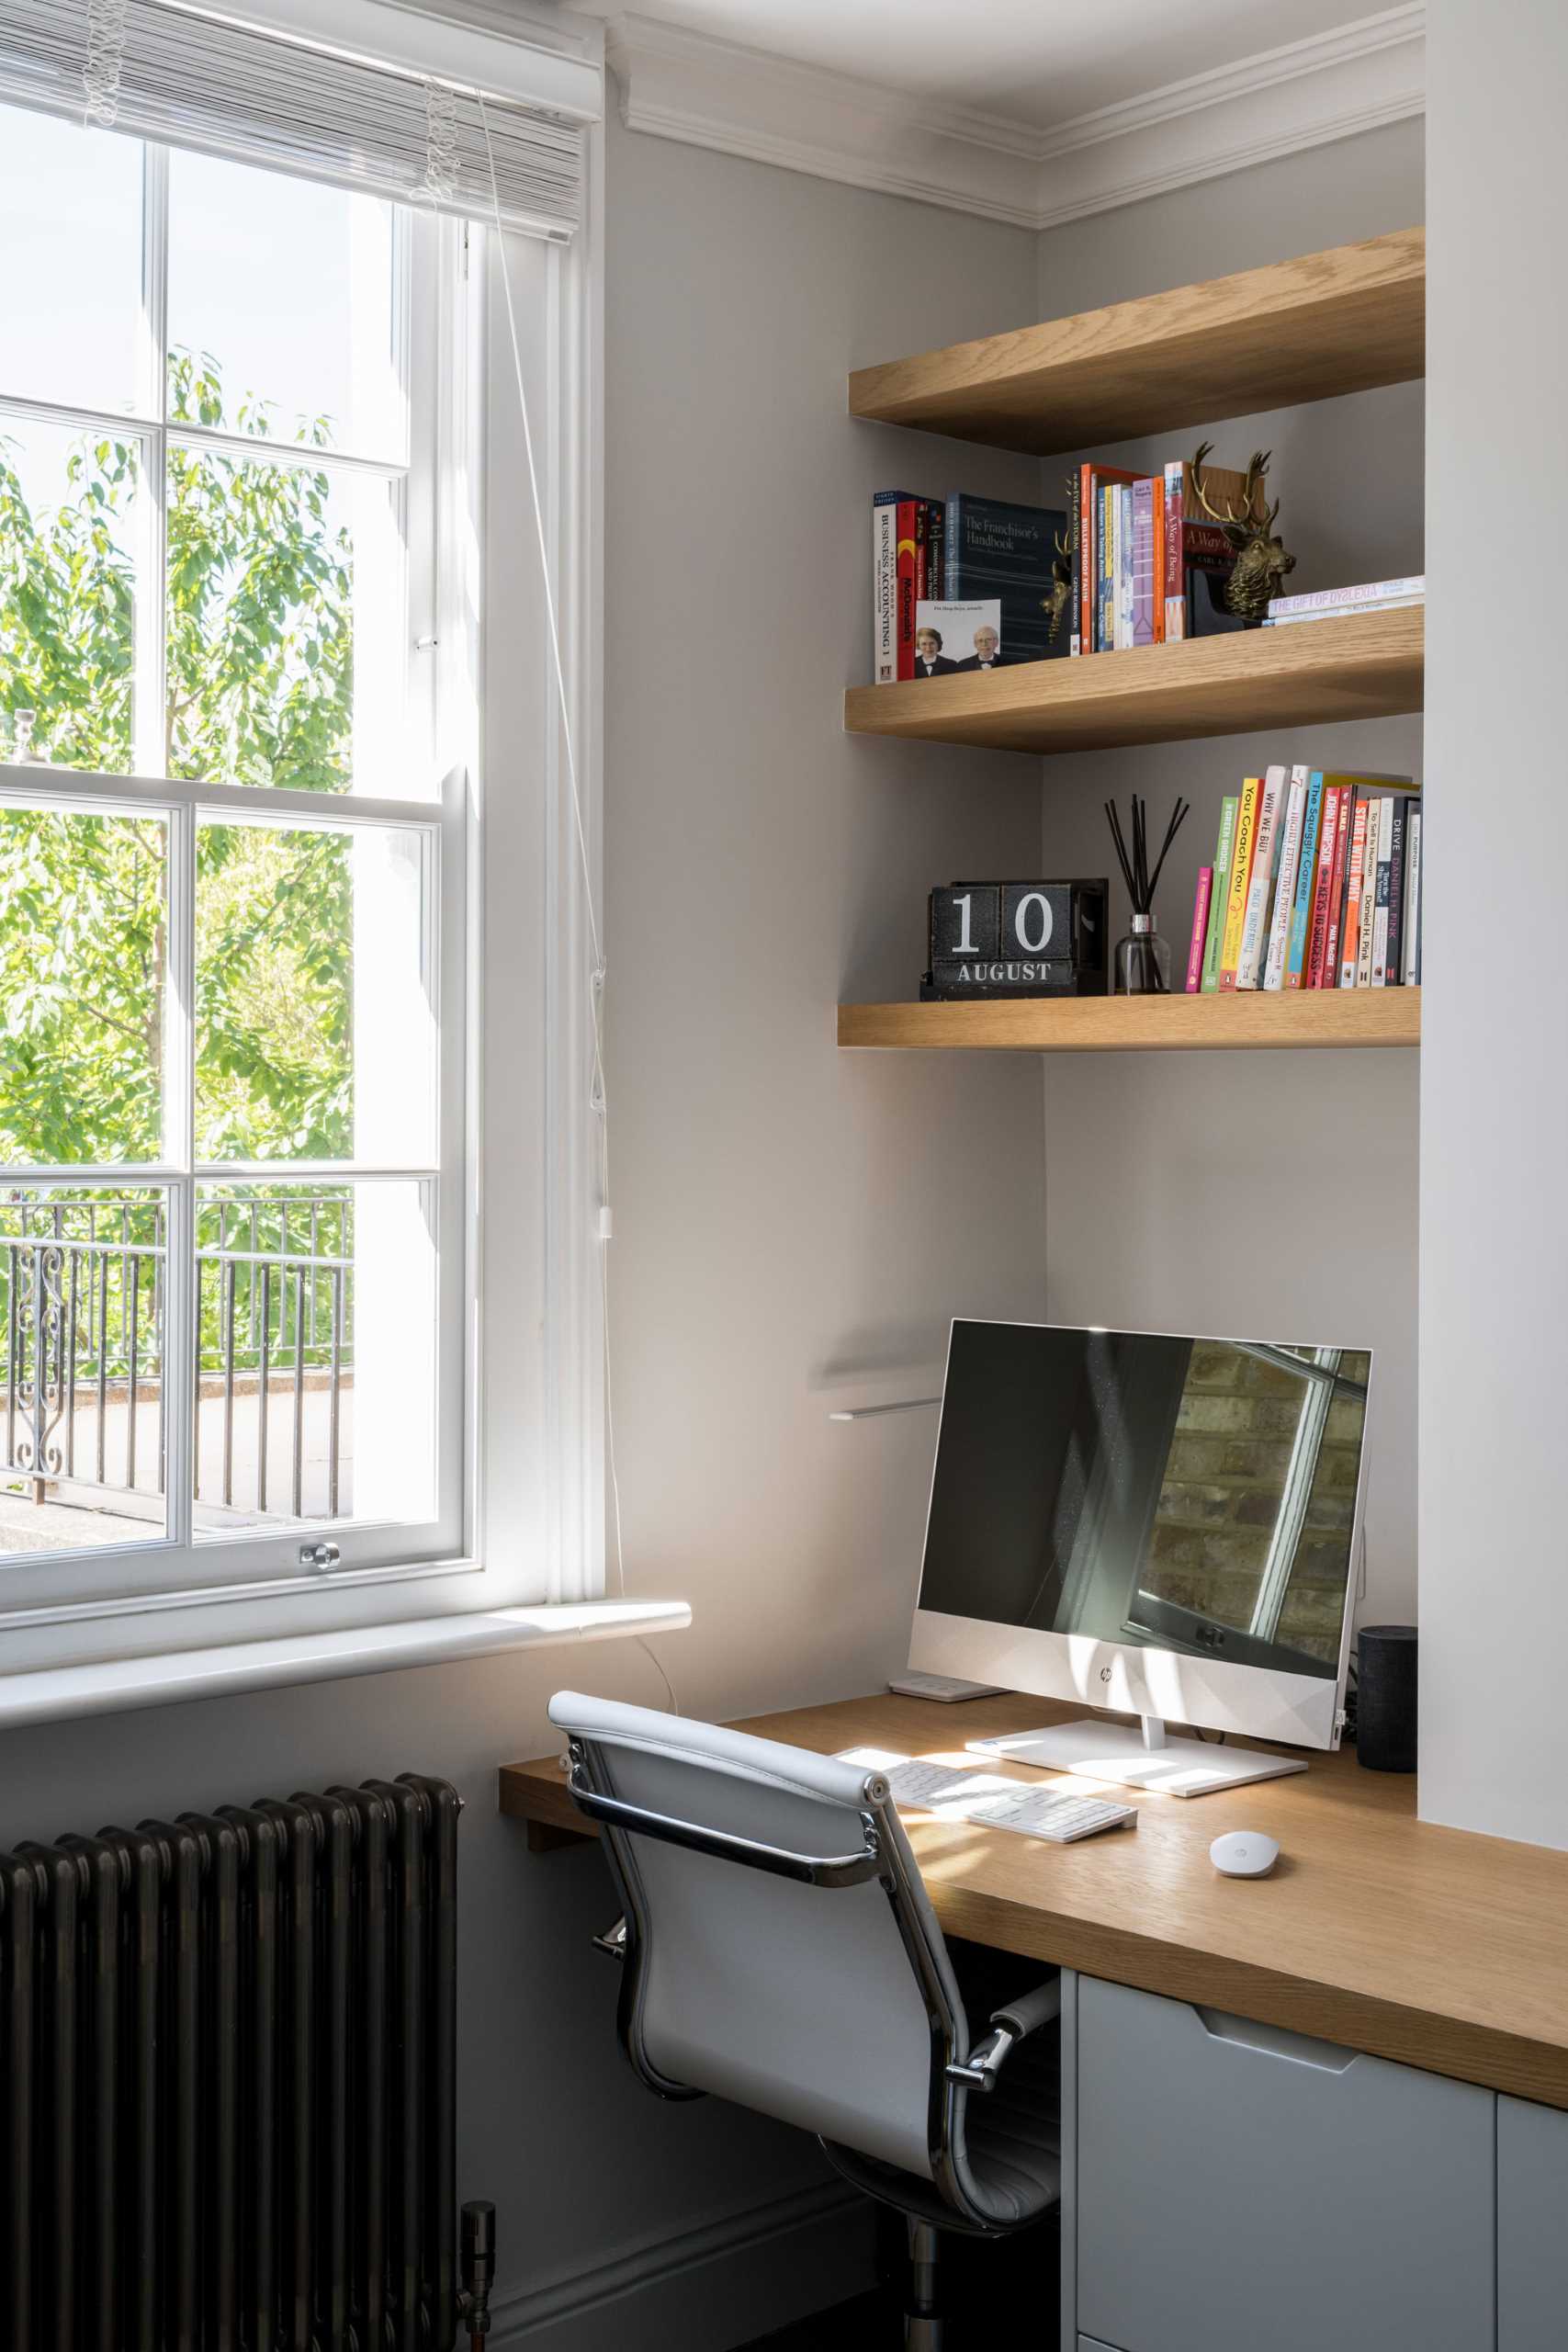 A bedroom niche was filled with built-in shelves and a desk to create a small work area.